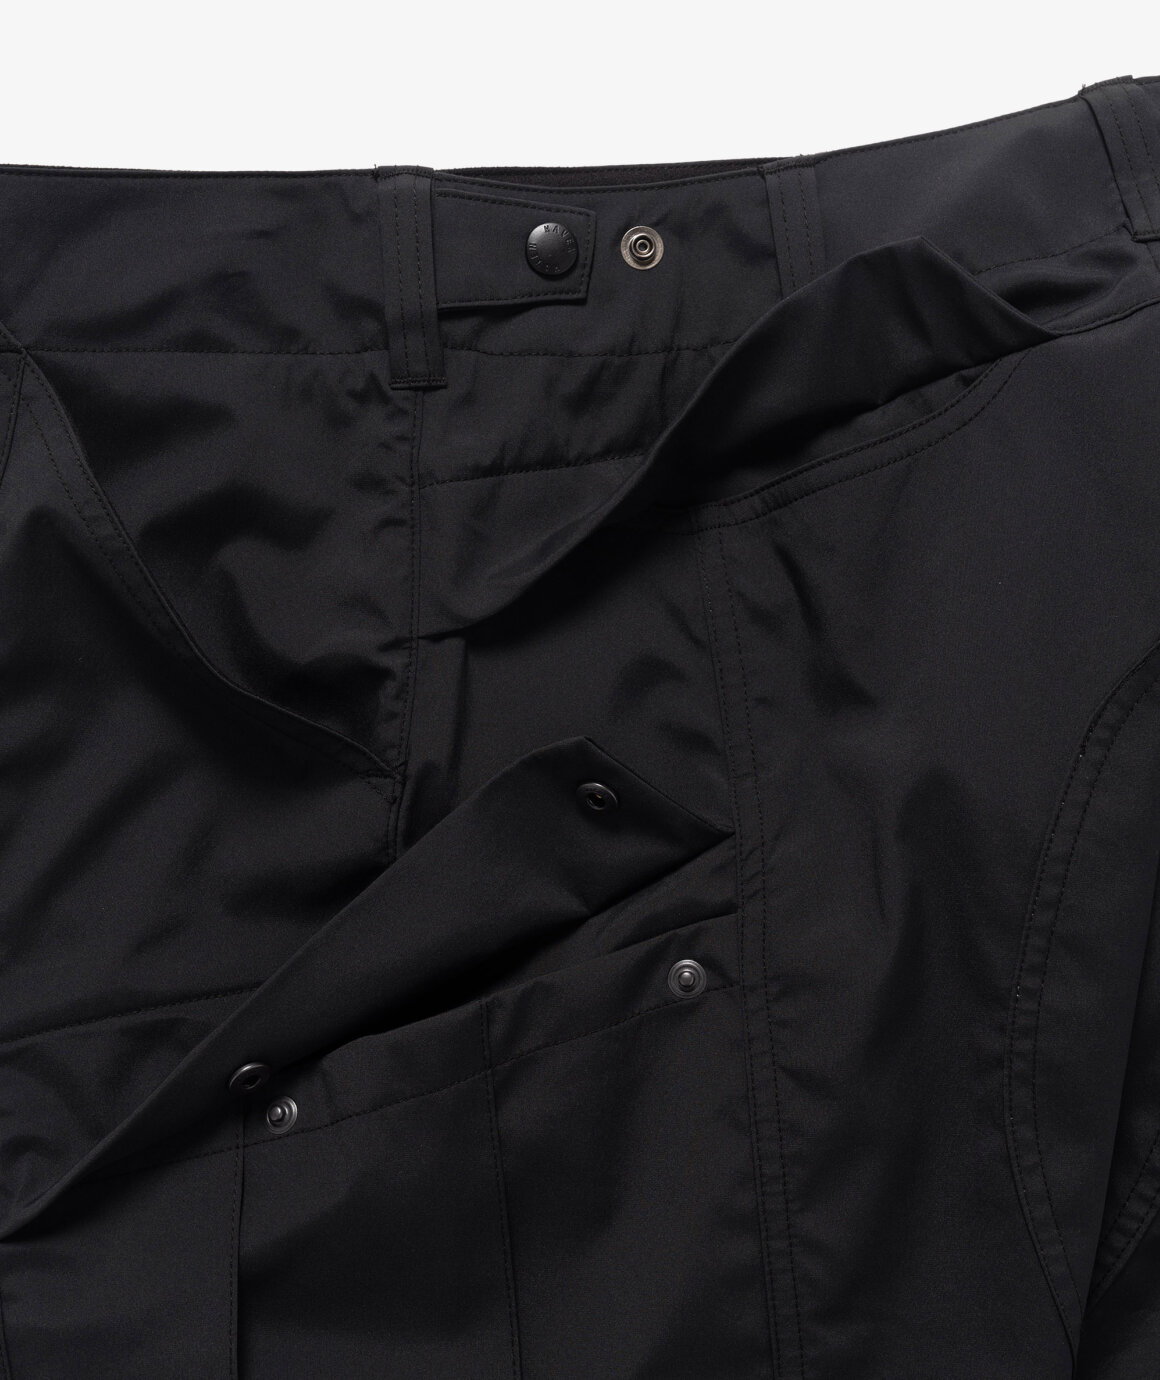 Norse Store | Shipping Worldwide - Haven Recon Pants - Black